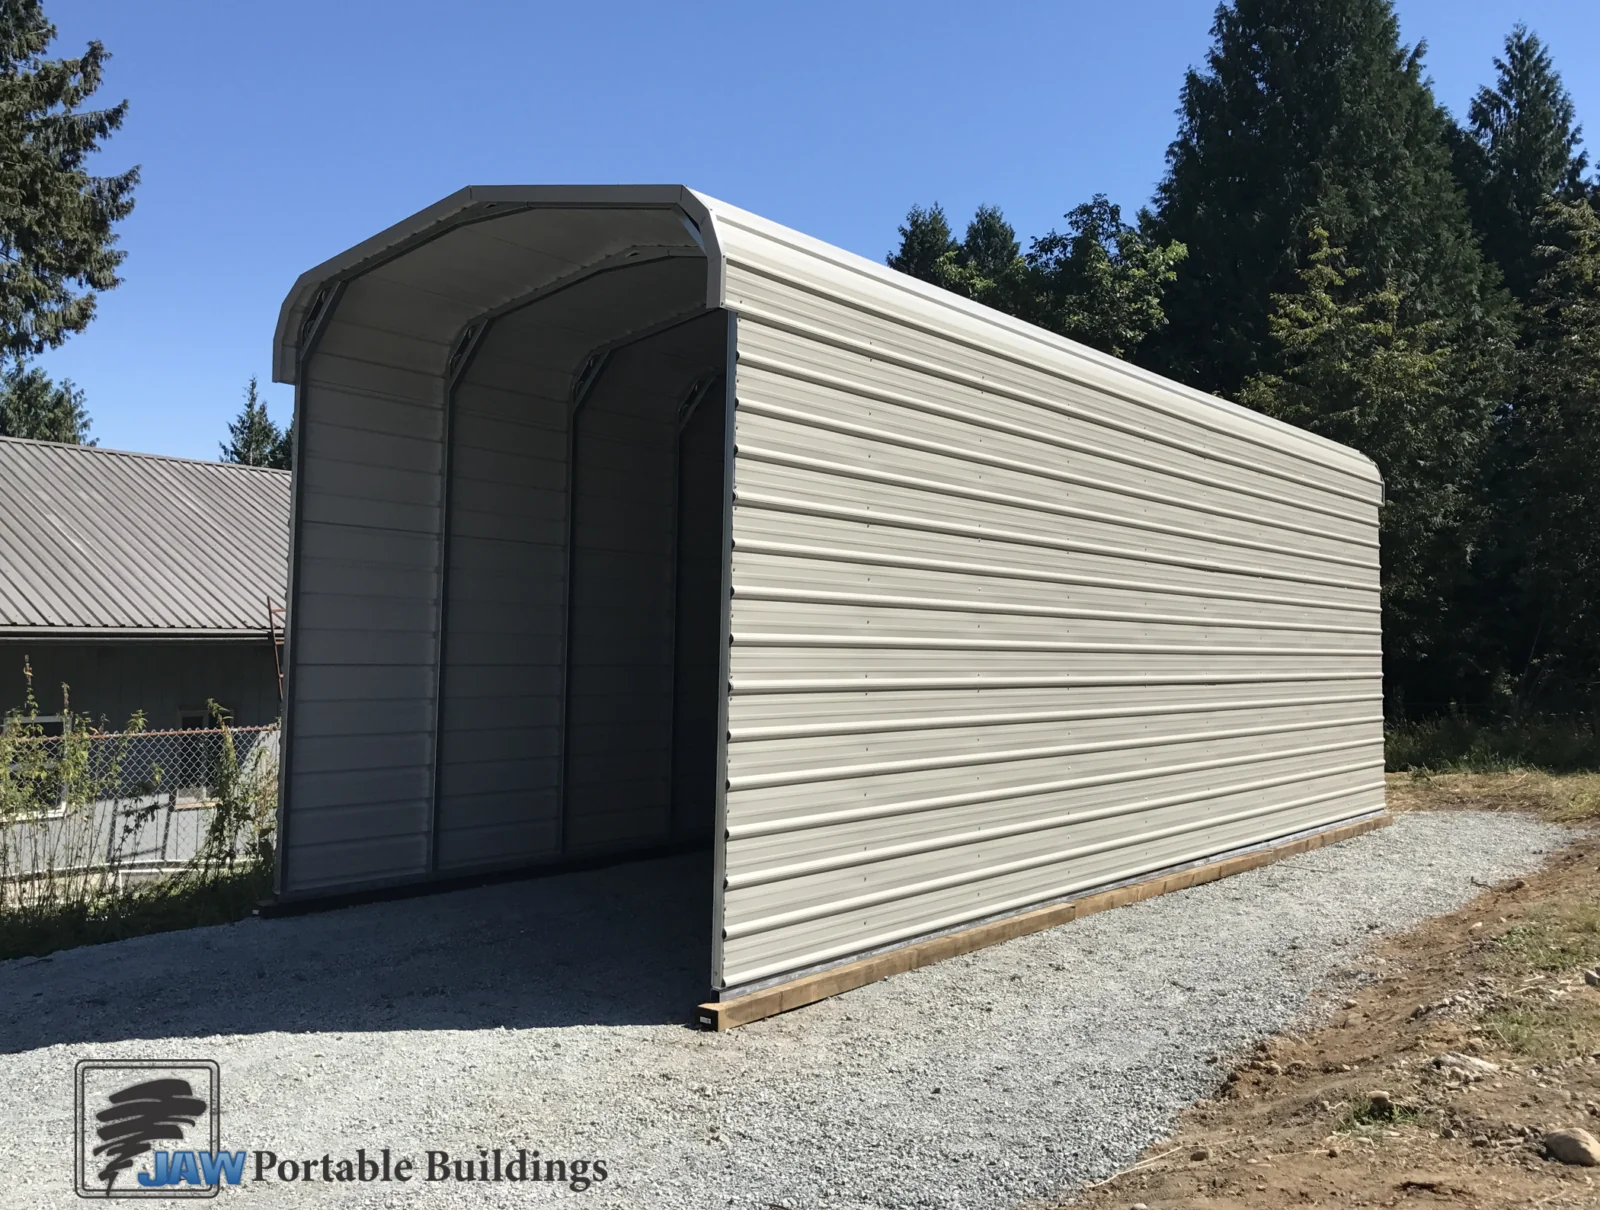 Boat Storage Shelter - JAW Portable Buildings